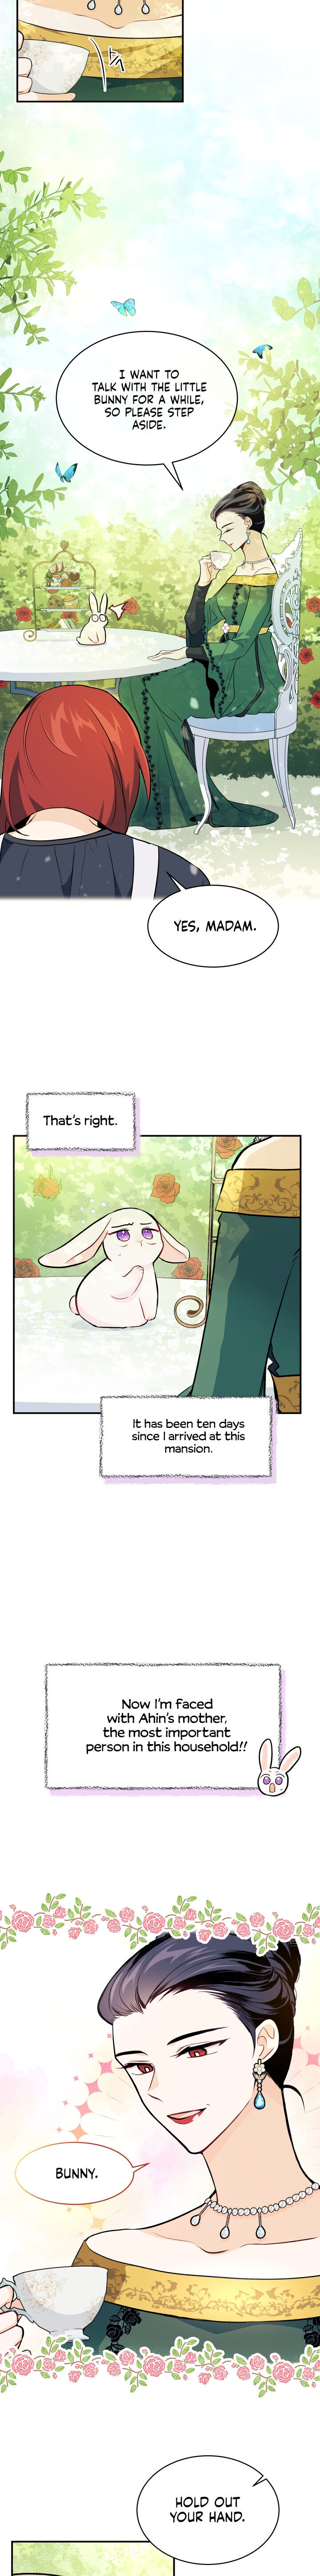 A Symbiotic Relationship Between A Rabbit And A Black Panther - Chapter 5 Page 4